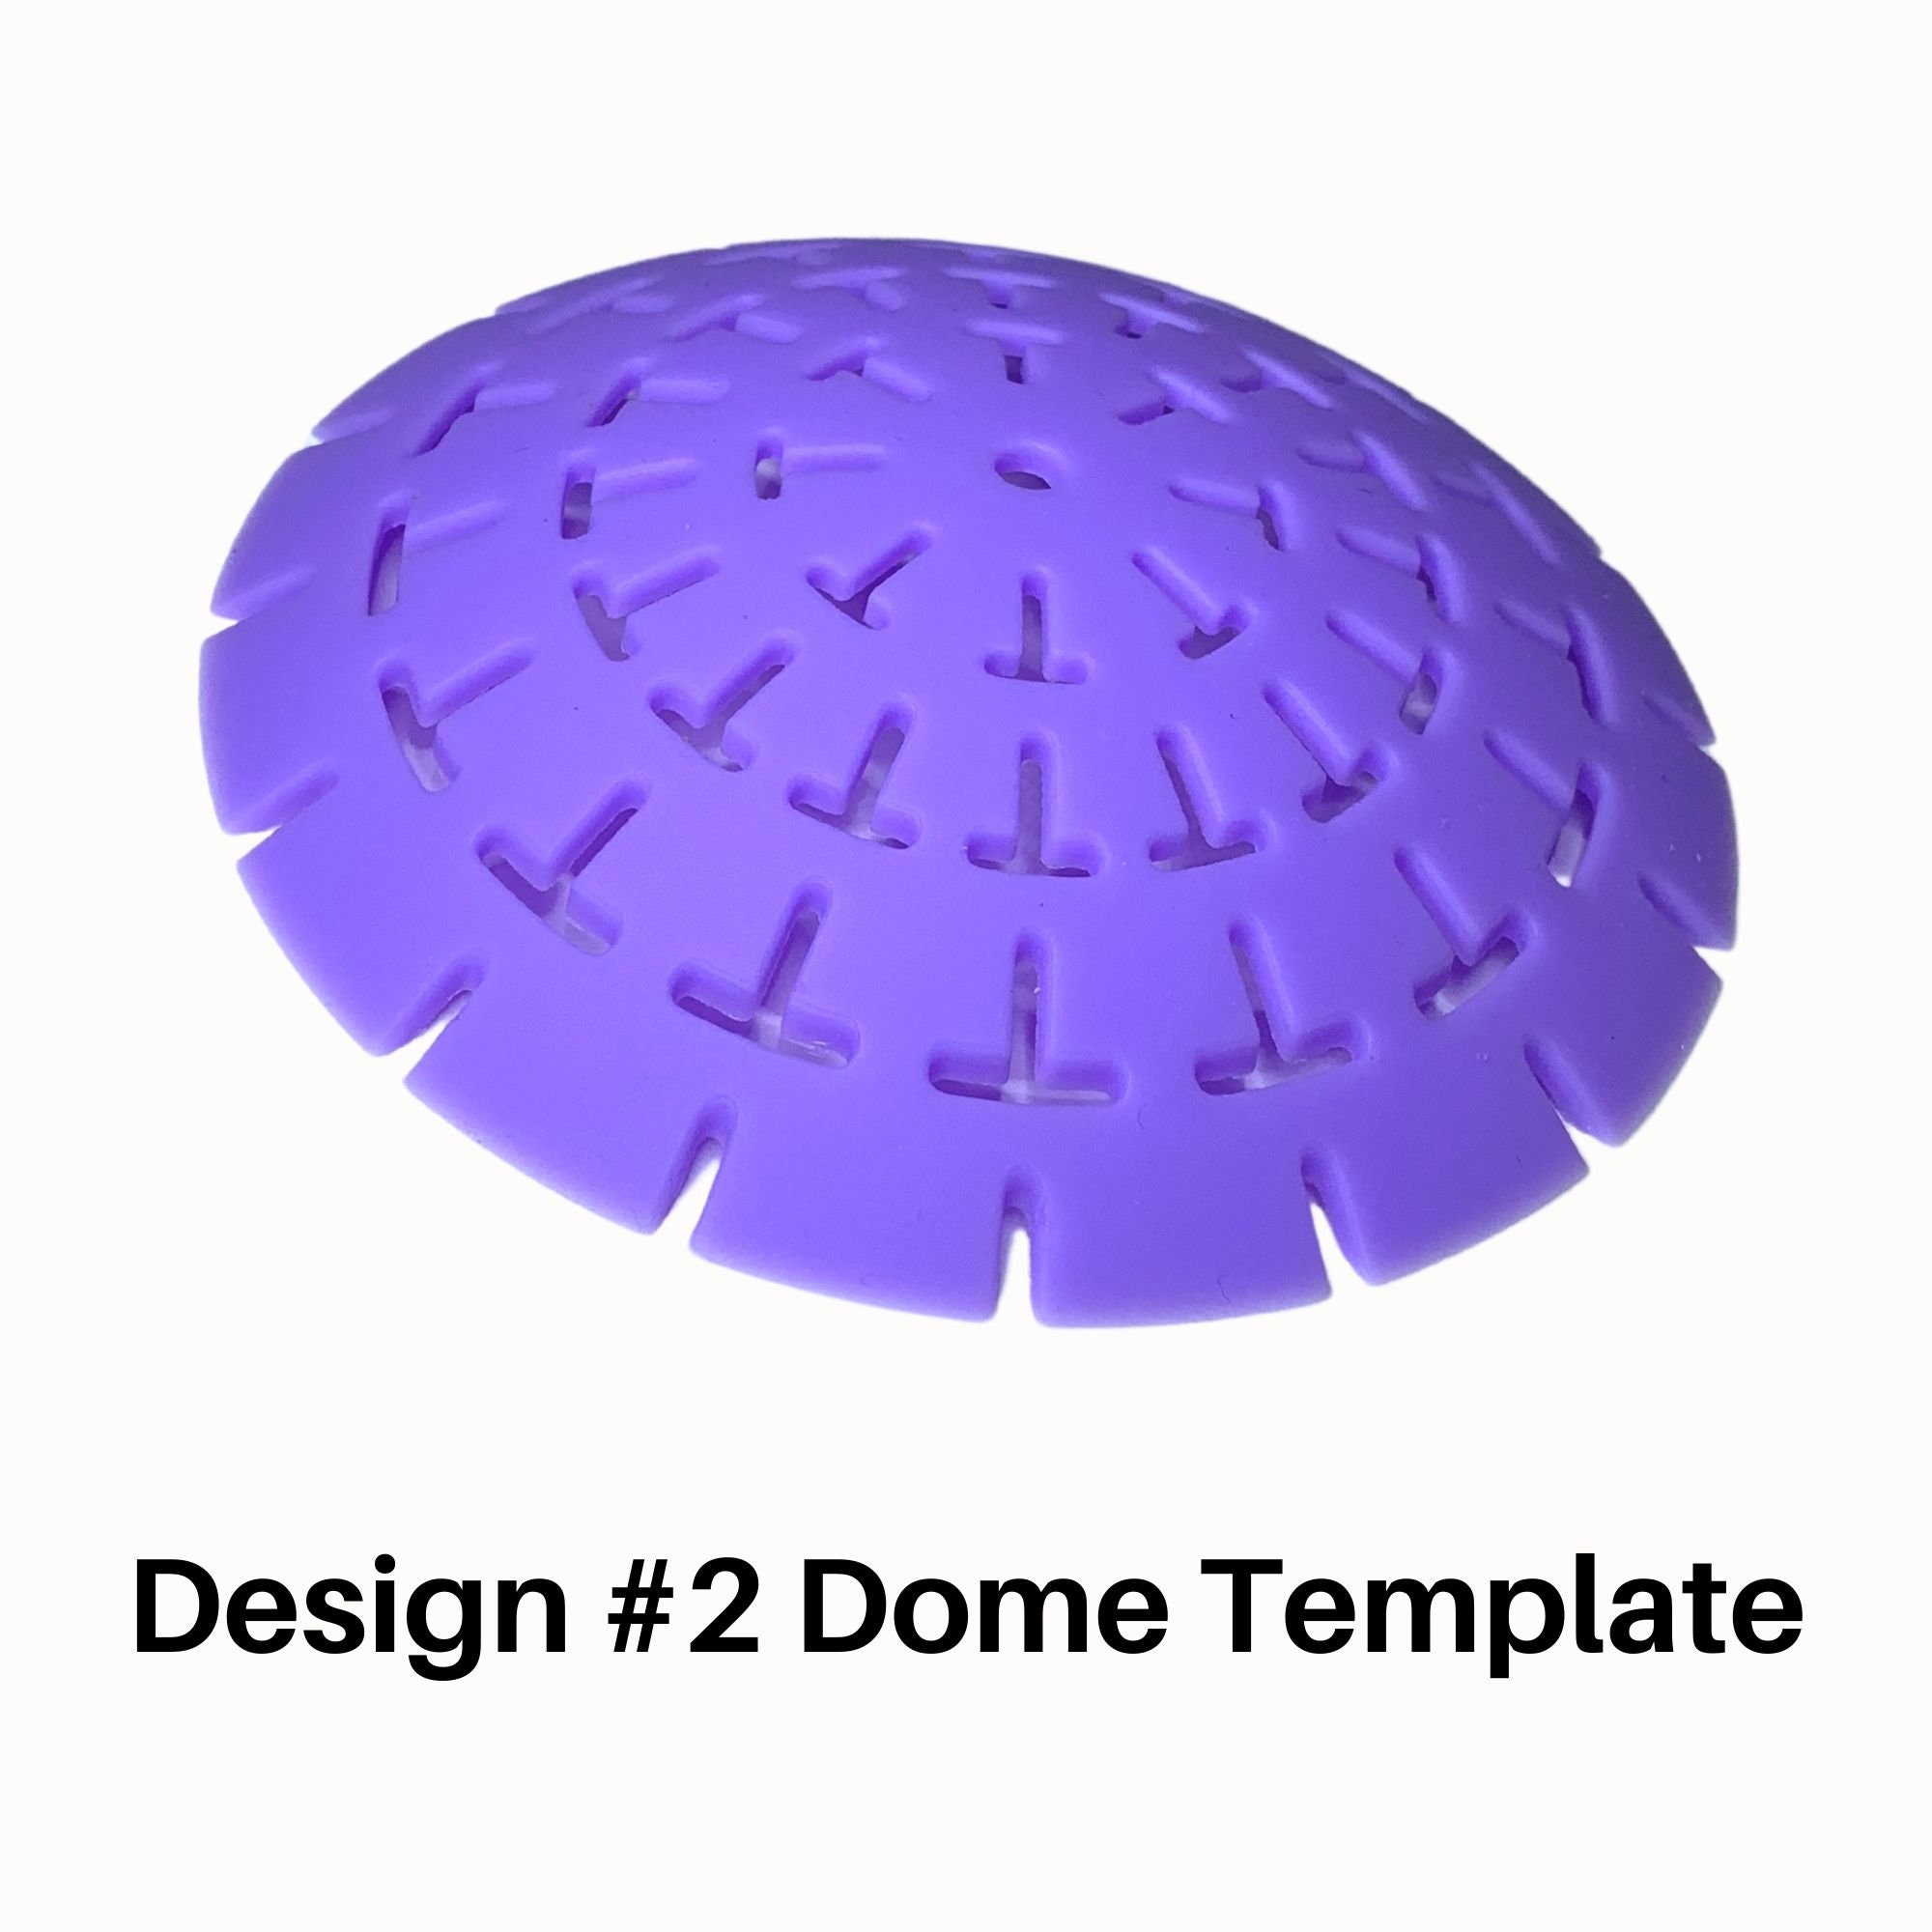 4” - Turntable for Painting - Happy Dotting Company - Best Small Turntable  for dot Art - Must-Have Tool for Mandala Art Stone Painting - Lazy Susan 